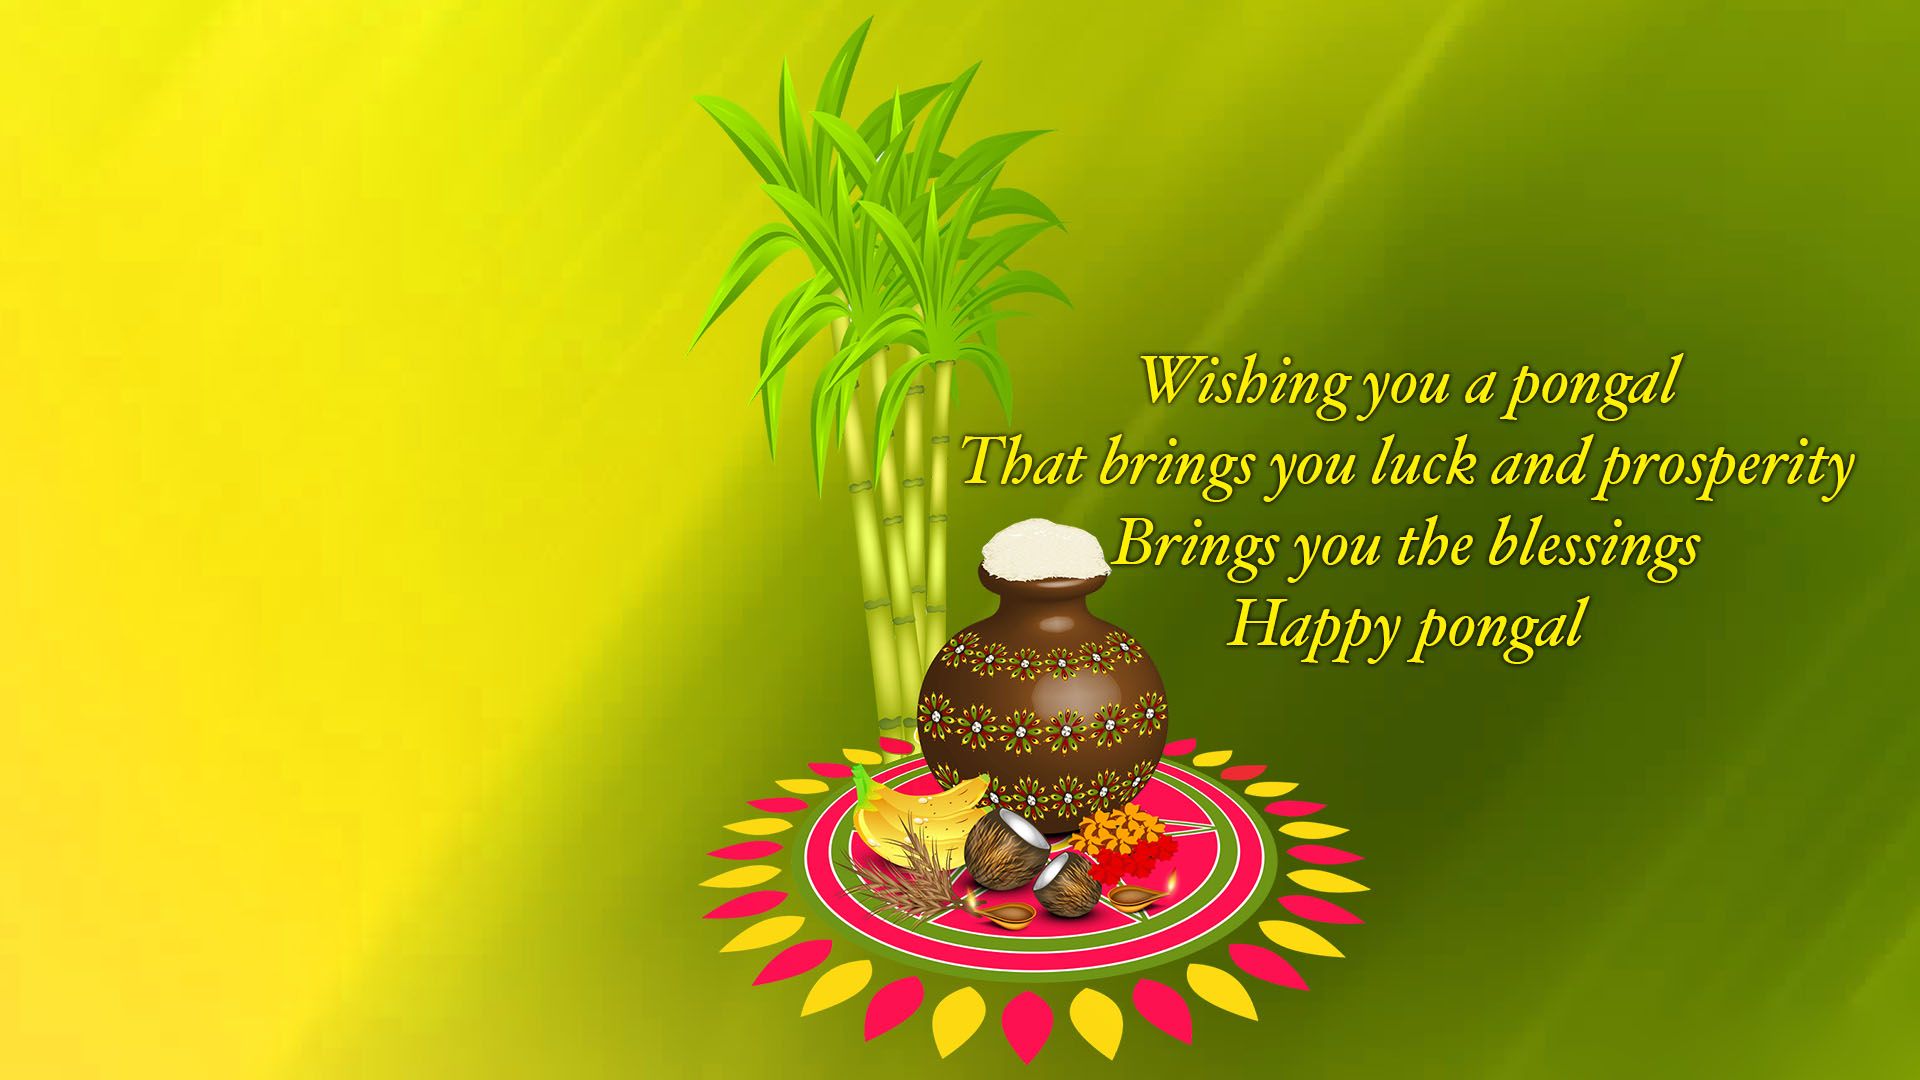 Happy Pongal Wallpaper Picture Image